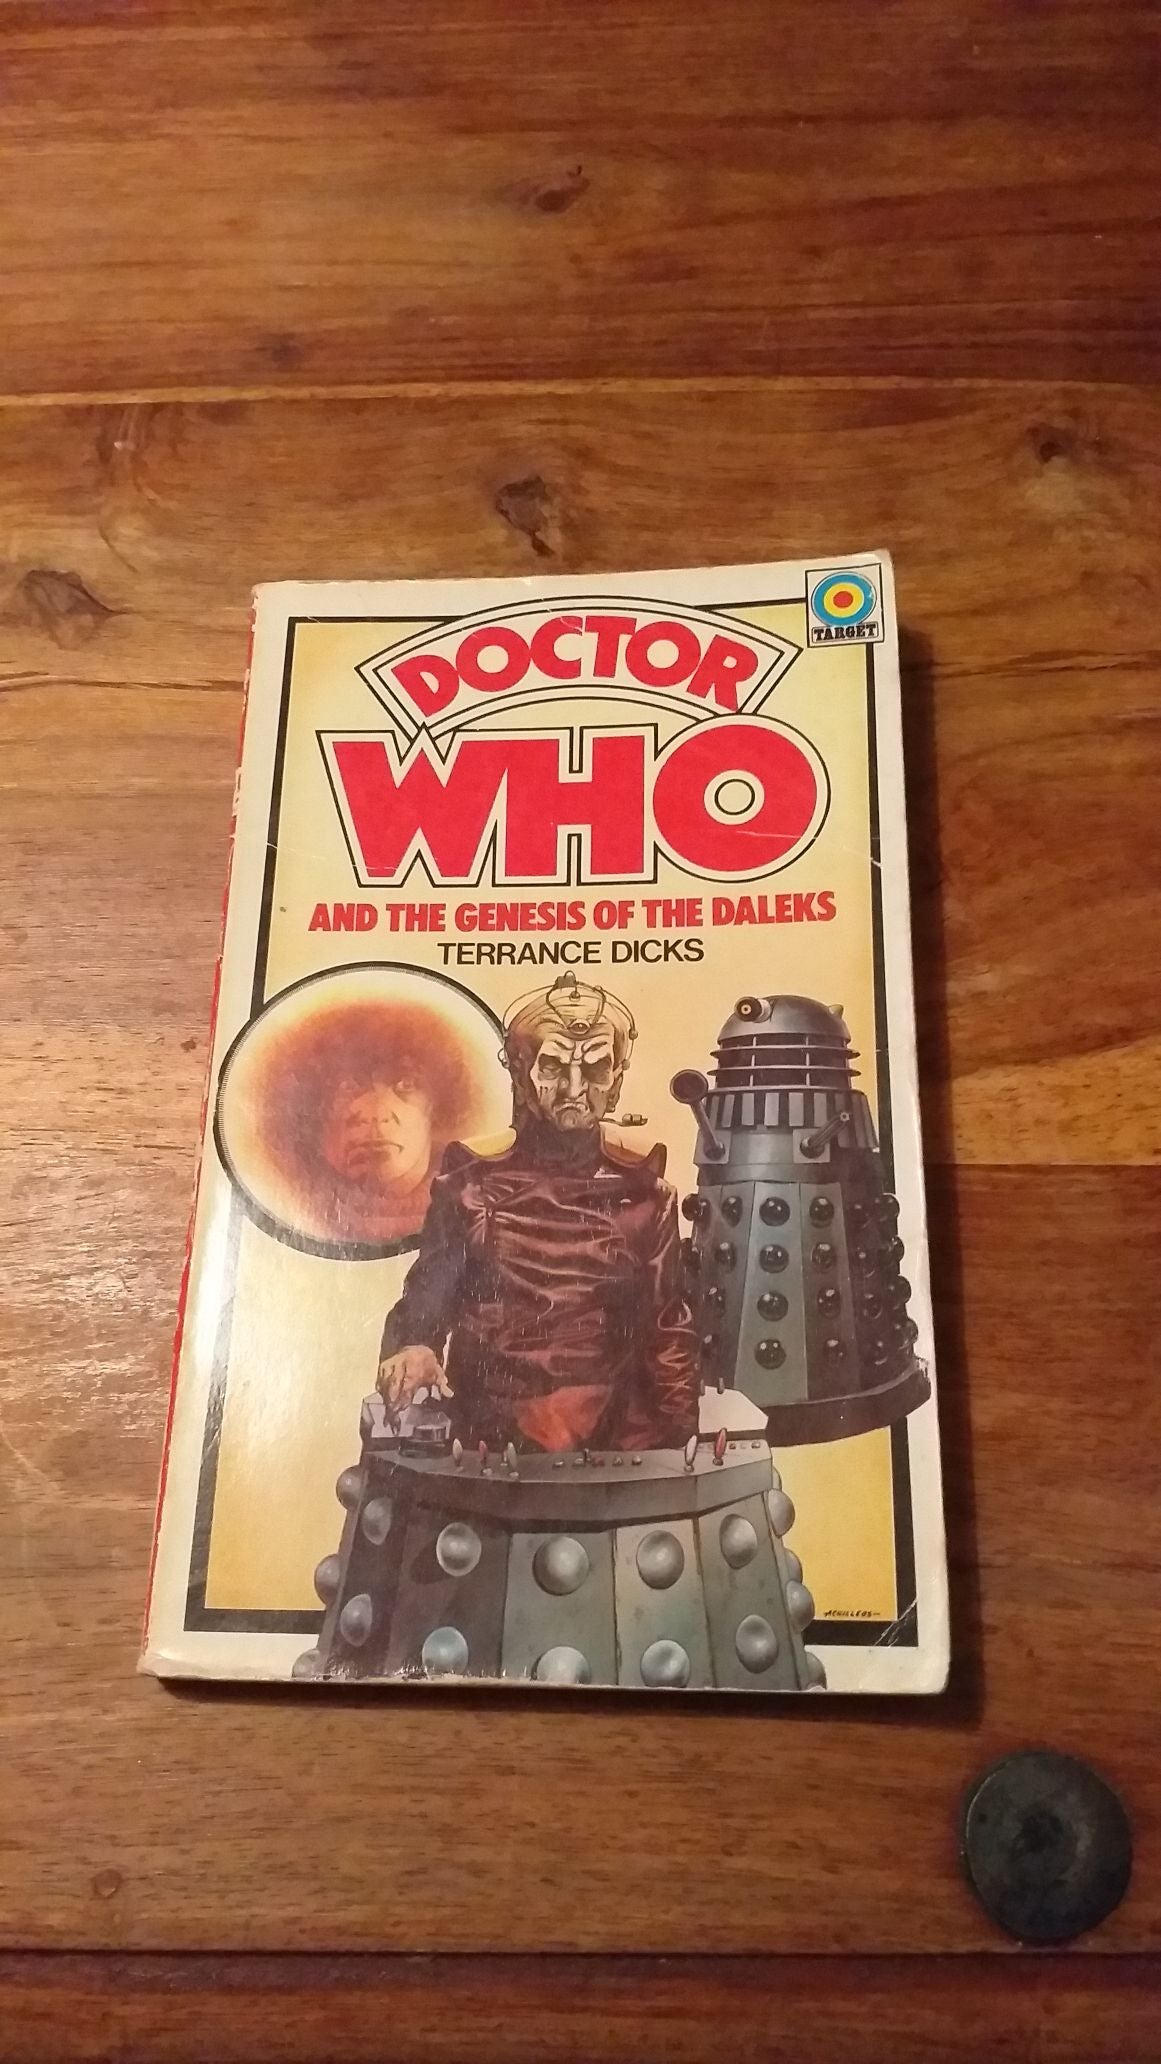 Doctor Who and the Genesis of the Daleks Terrance Dicks